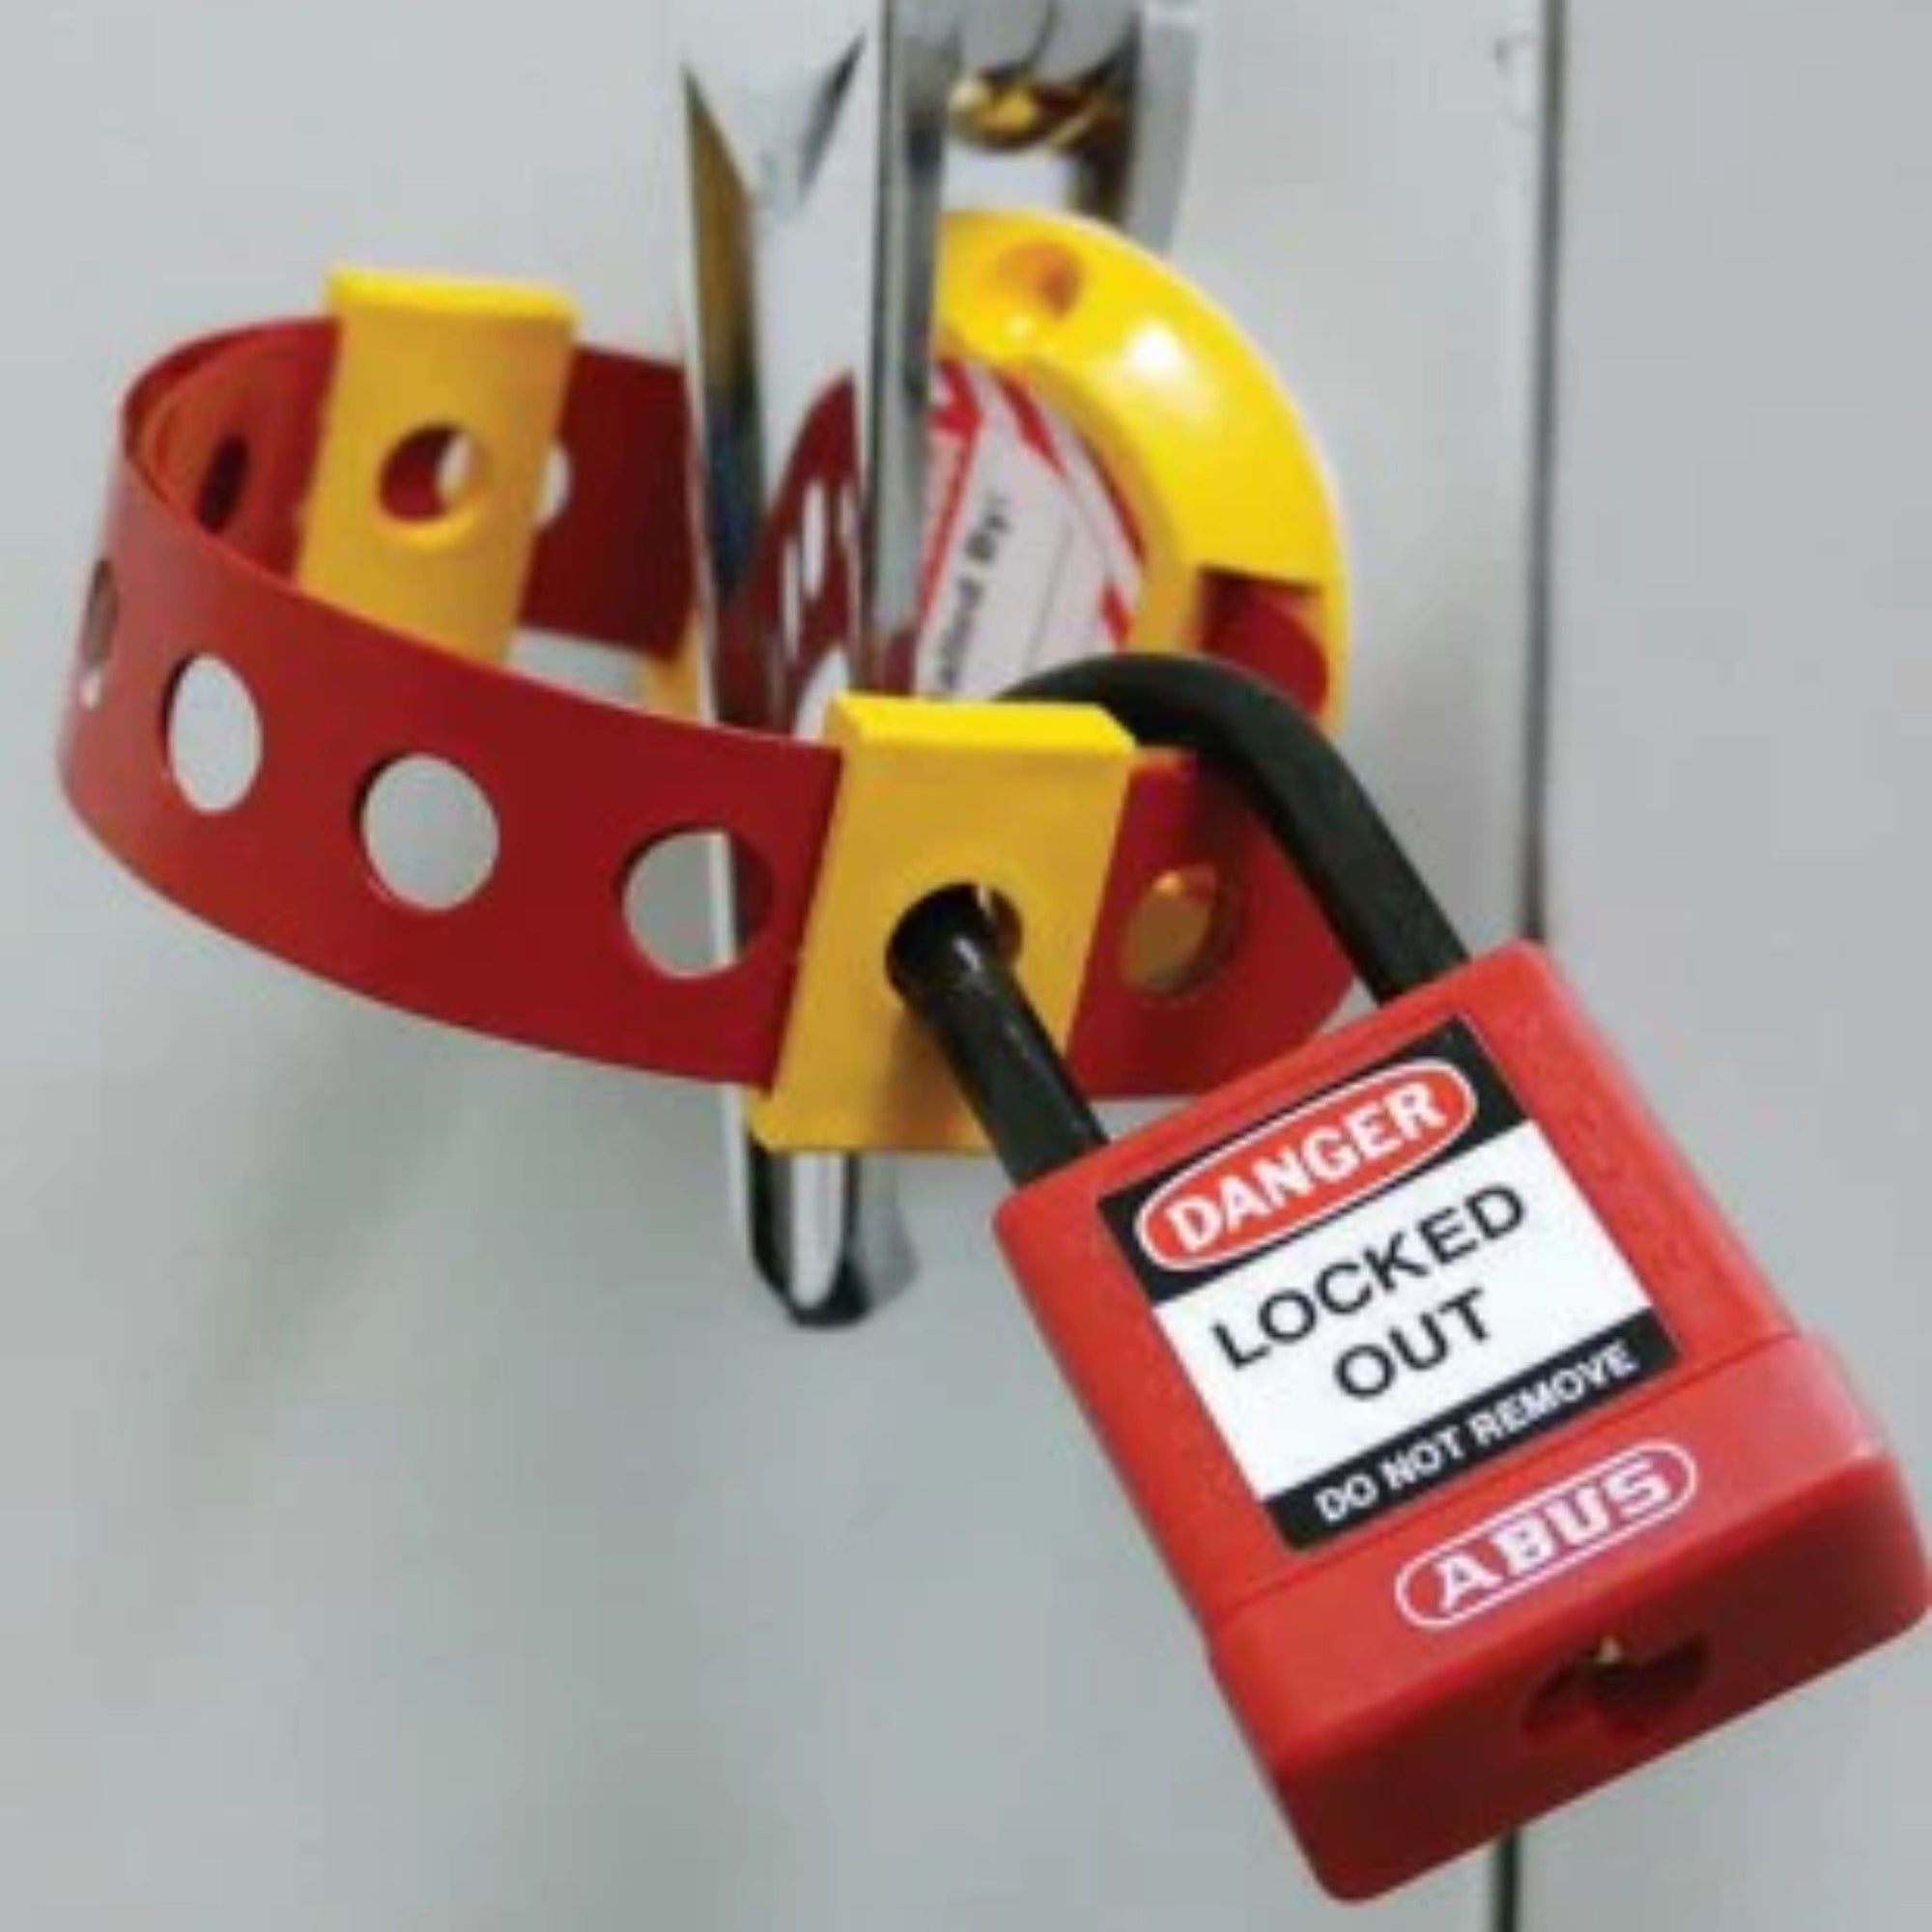 The Abus 00456 Electrical Panel Lockout Device Prohibits Movement of Handles or Levers on Electrical Panels During Maintenance - The Lock Source